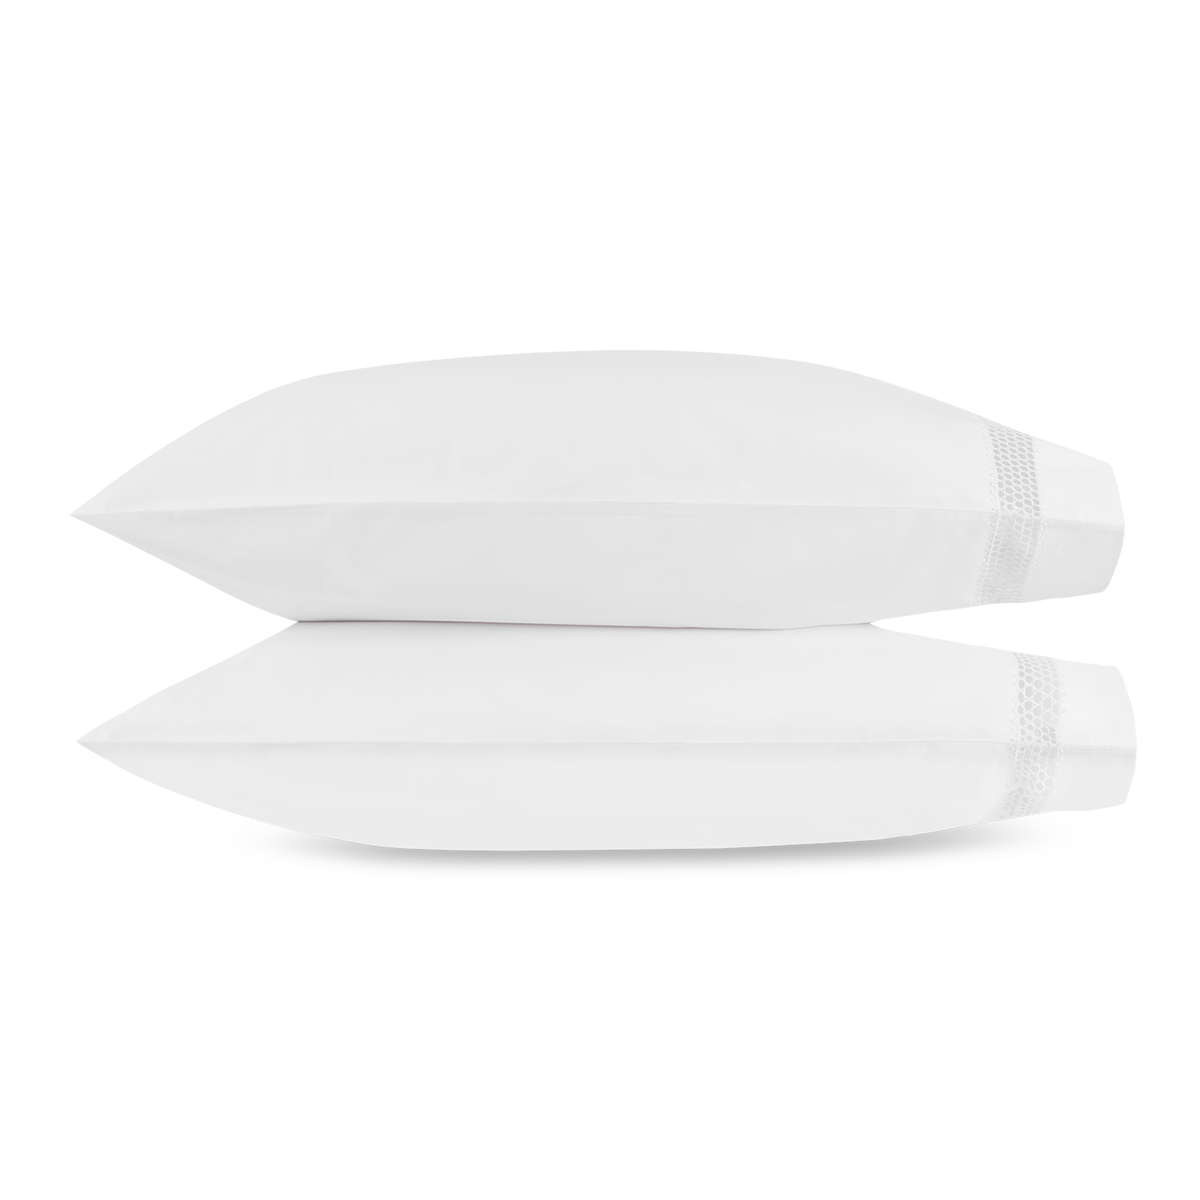 Clear Image of Matouk Cecily Pillowcases in White Color